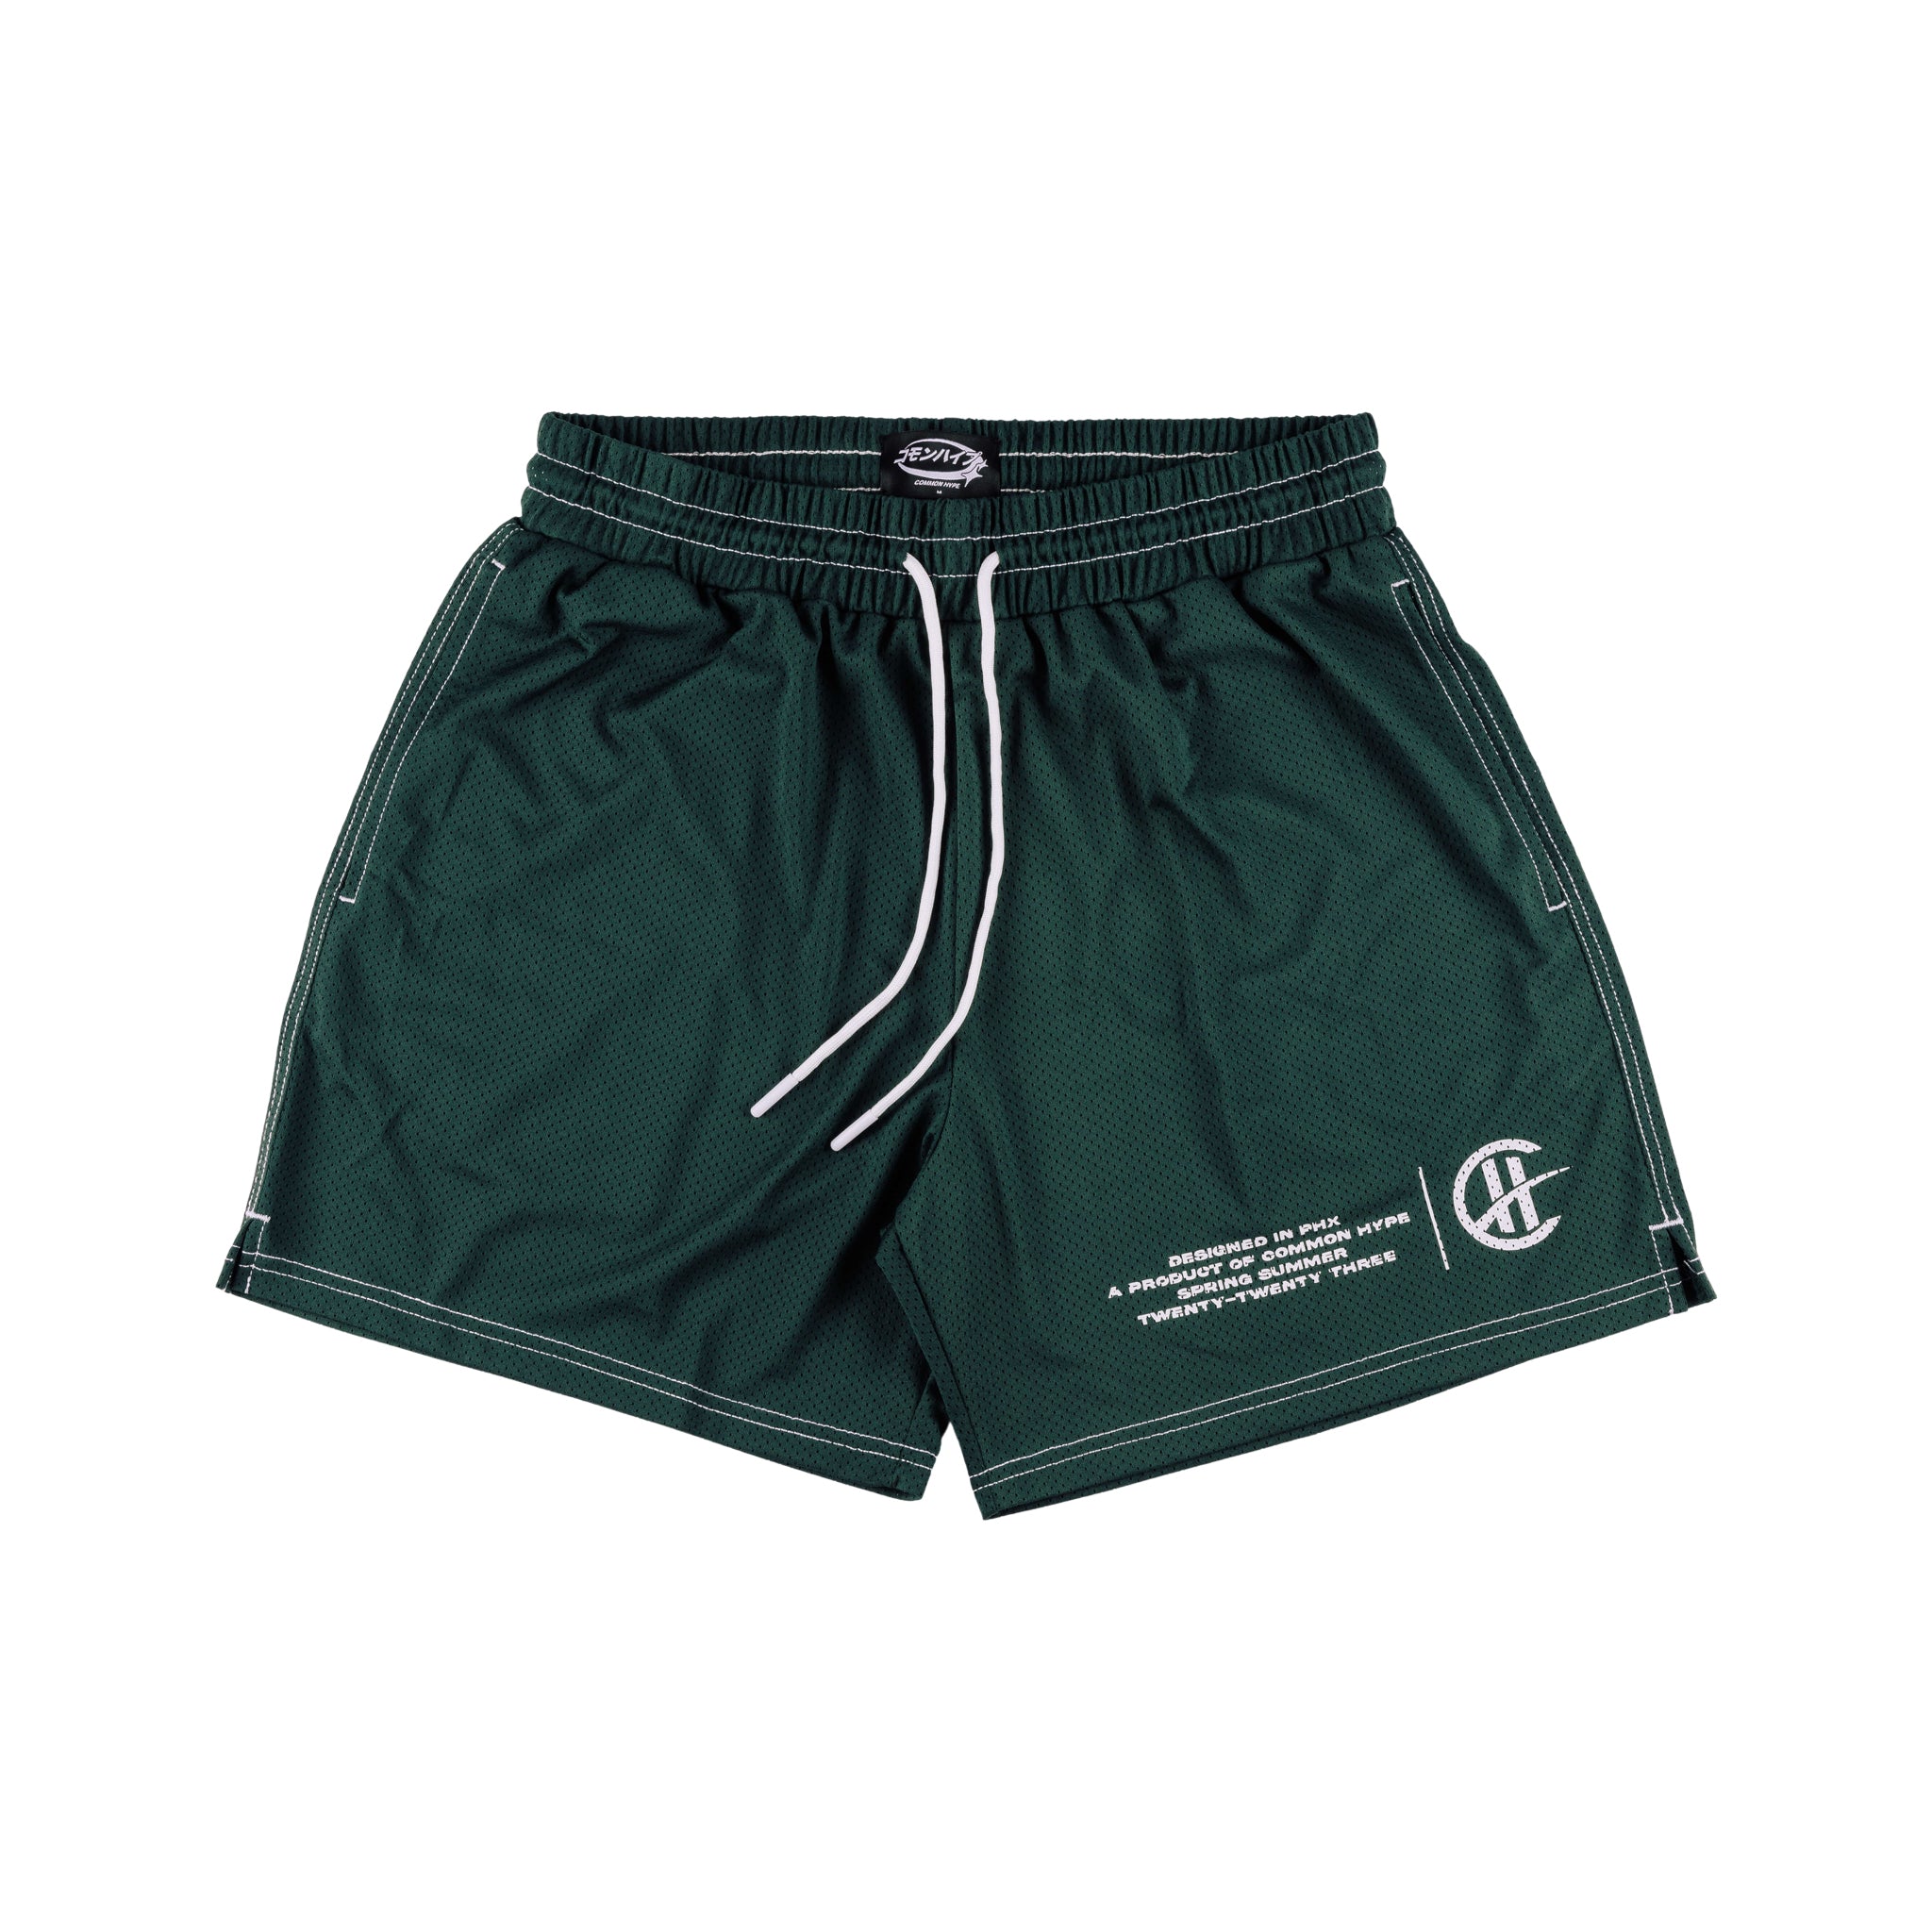 Common Hype Green Contrast Stitching Mesh Short